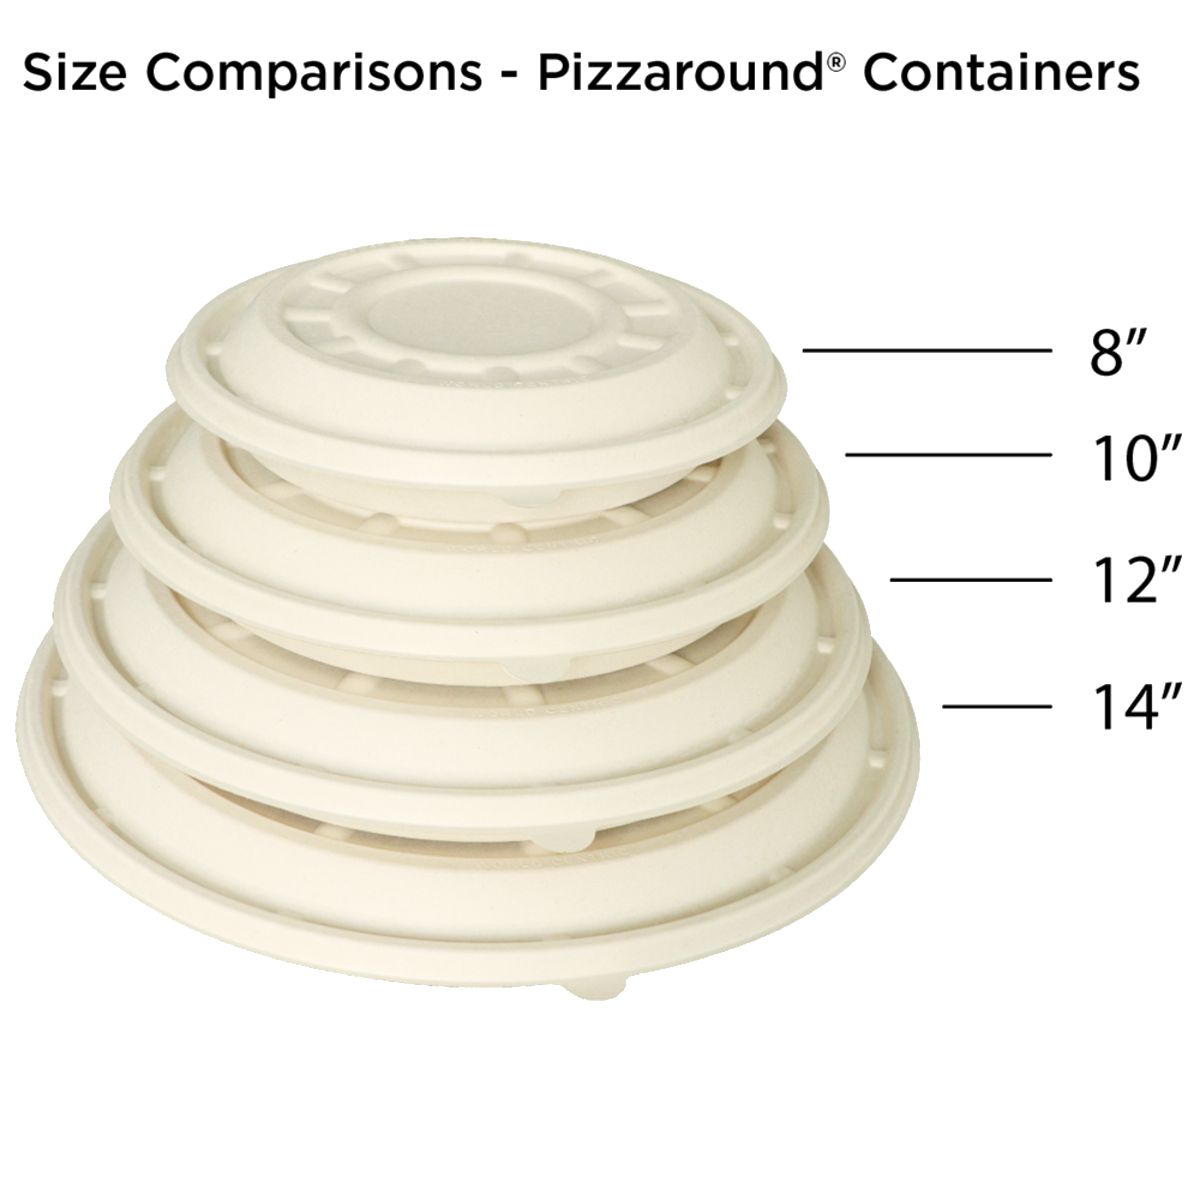 12" PizzaRound Tray - Lid sold separately - 200/case - World Centric